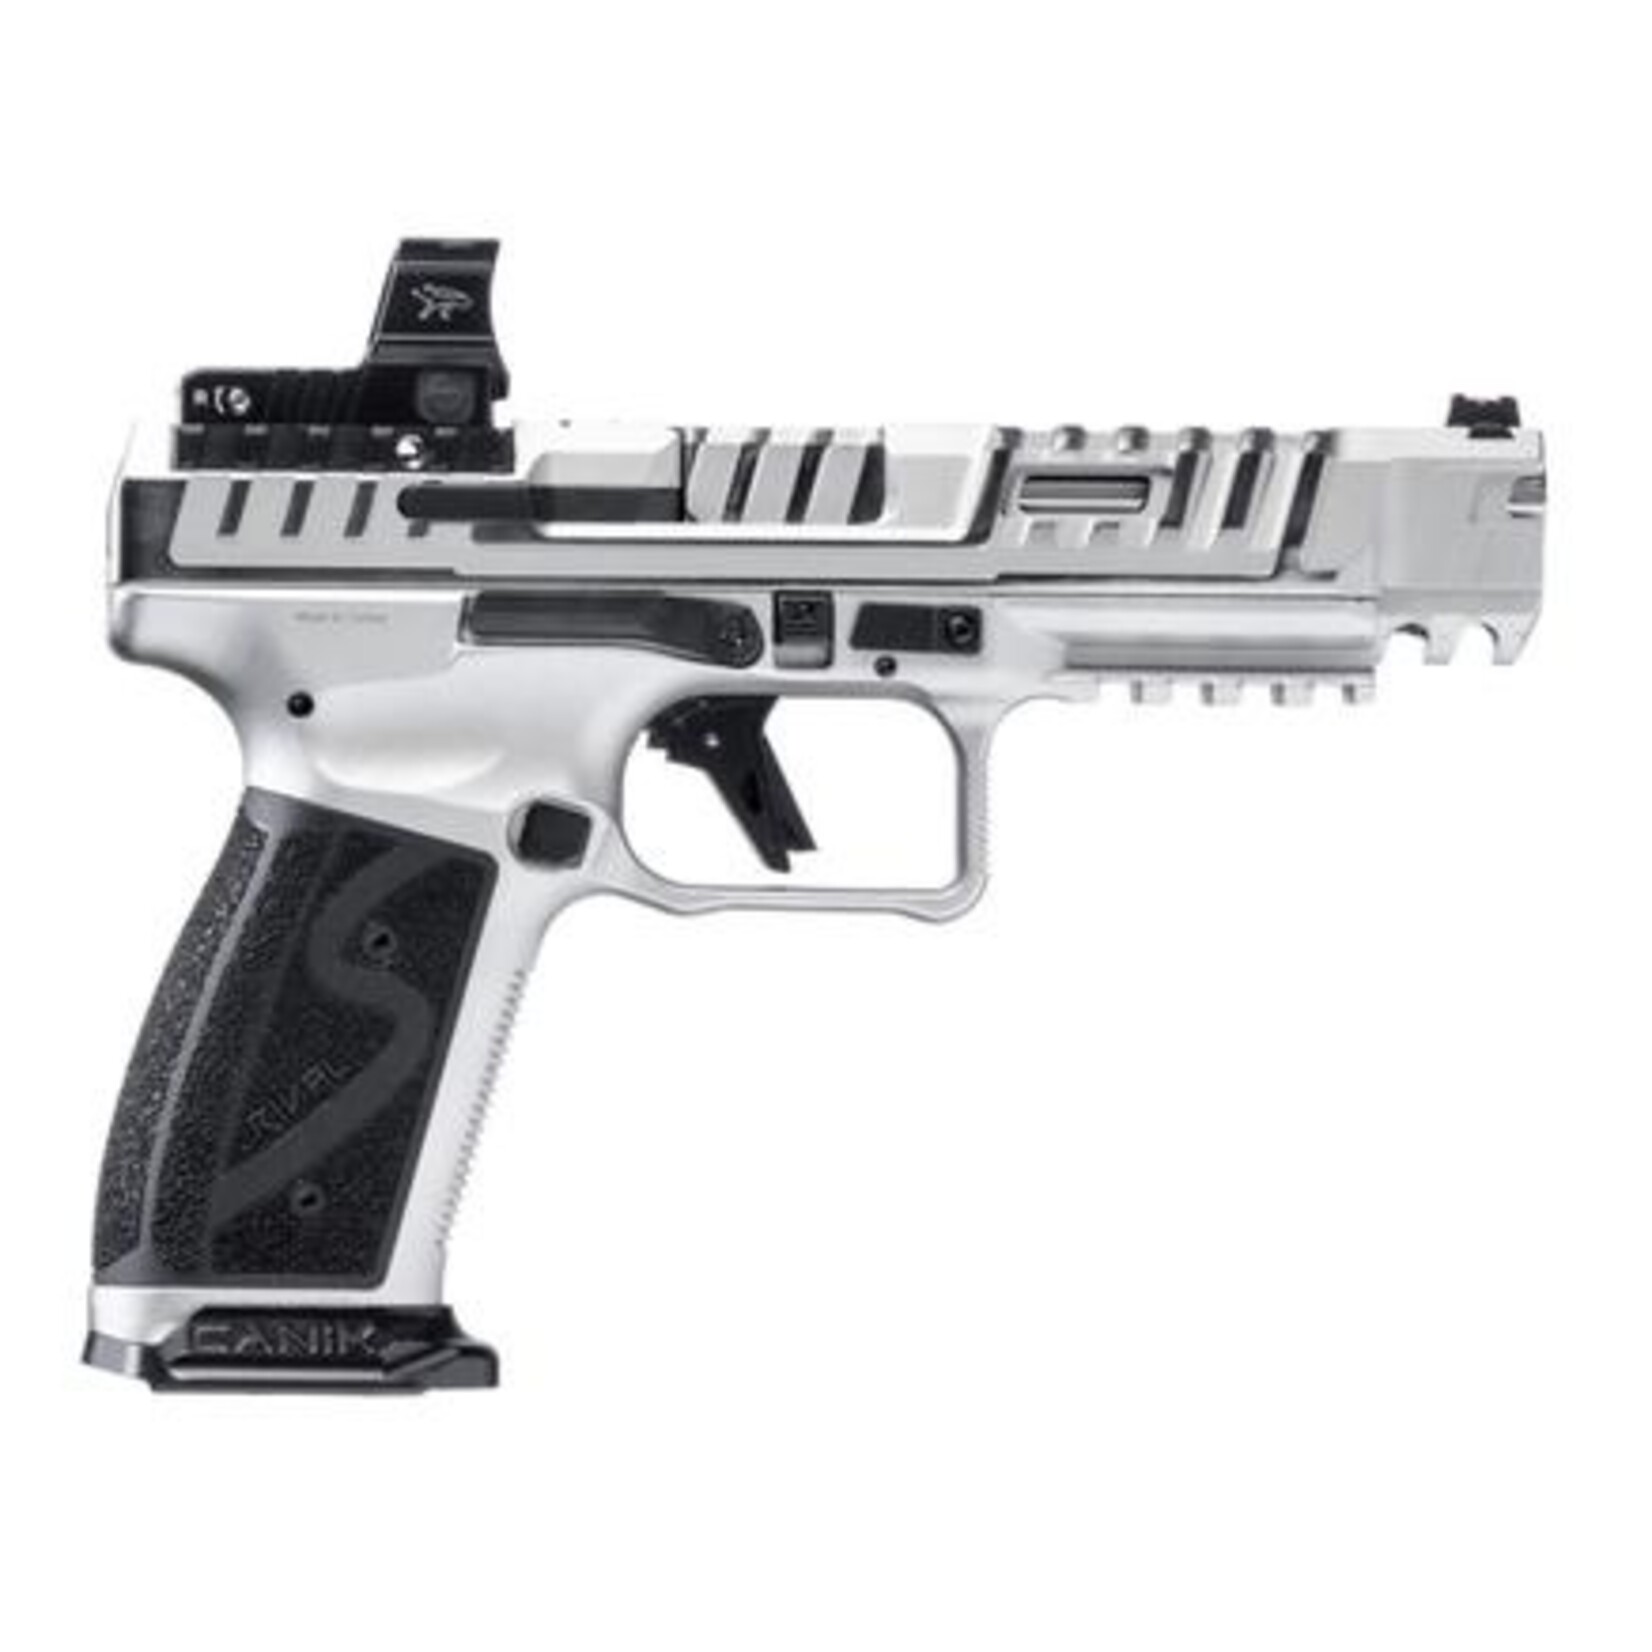 CANIK ARMS CANIK RIVAL-S W/RED DOT 9MM, 5.2''BBL, CHROME, 18+1